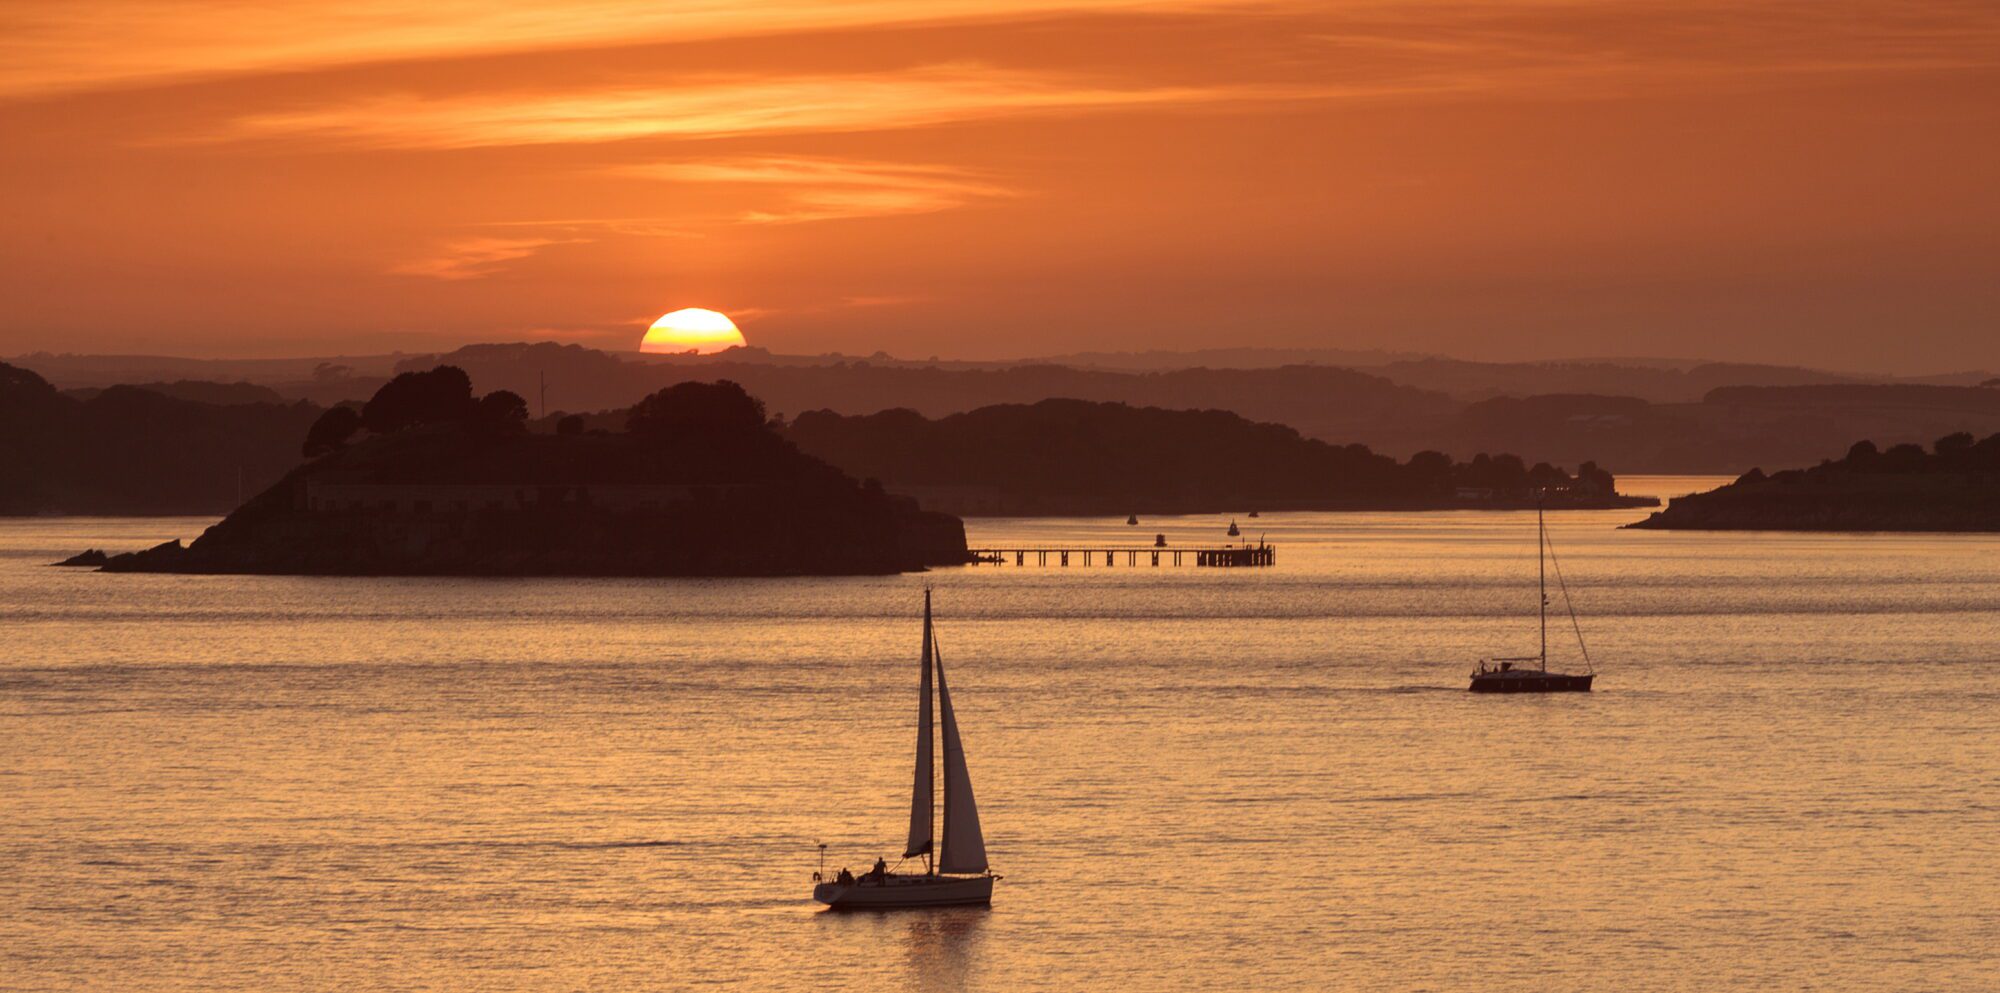 A bright orange sunset sky with a half-sun glowing orb visible just behind mountains and small estuary islands. A central island has a jetty silhouetted by the light. In the foreground, two sailboats, one with a sail up and one without, are also silhouetted on the still water.